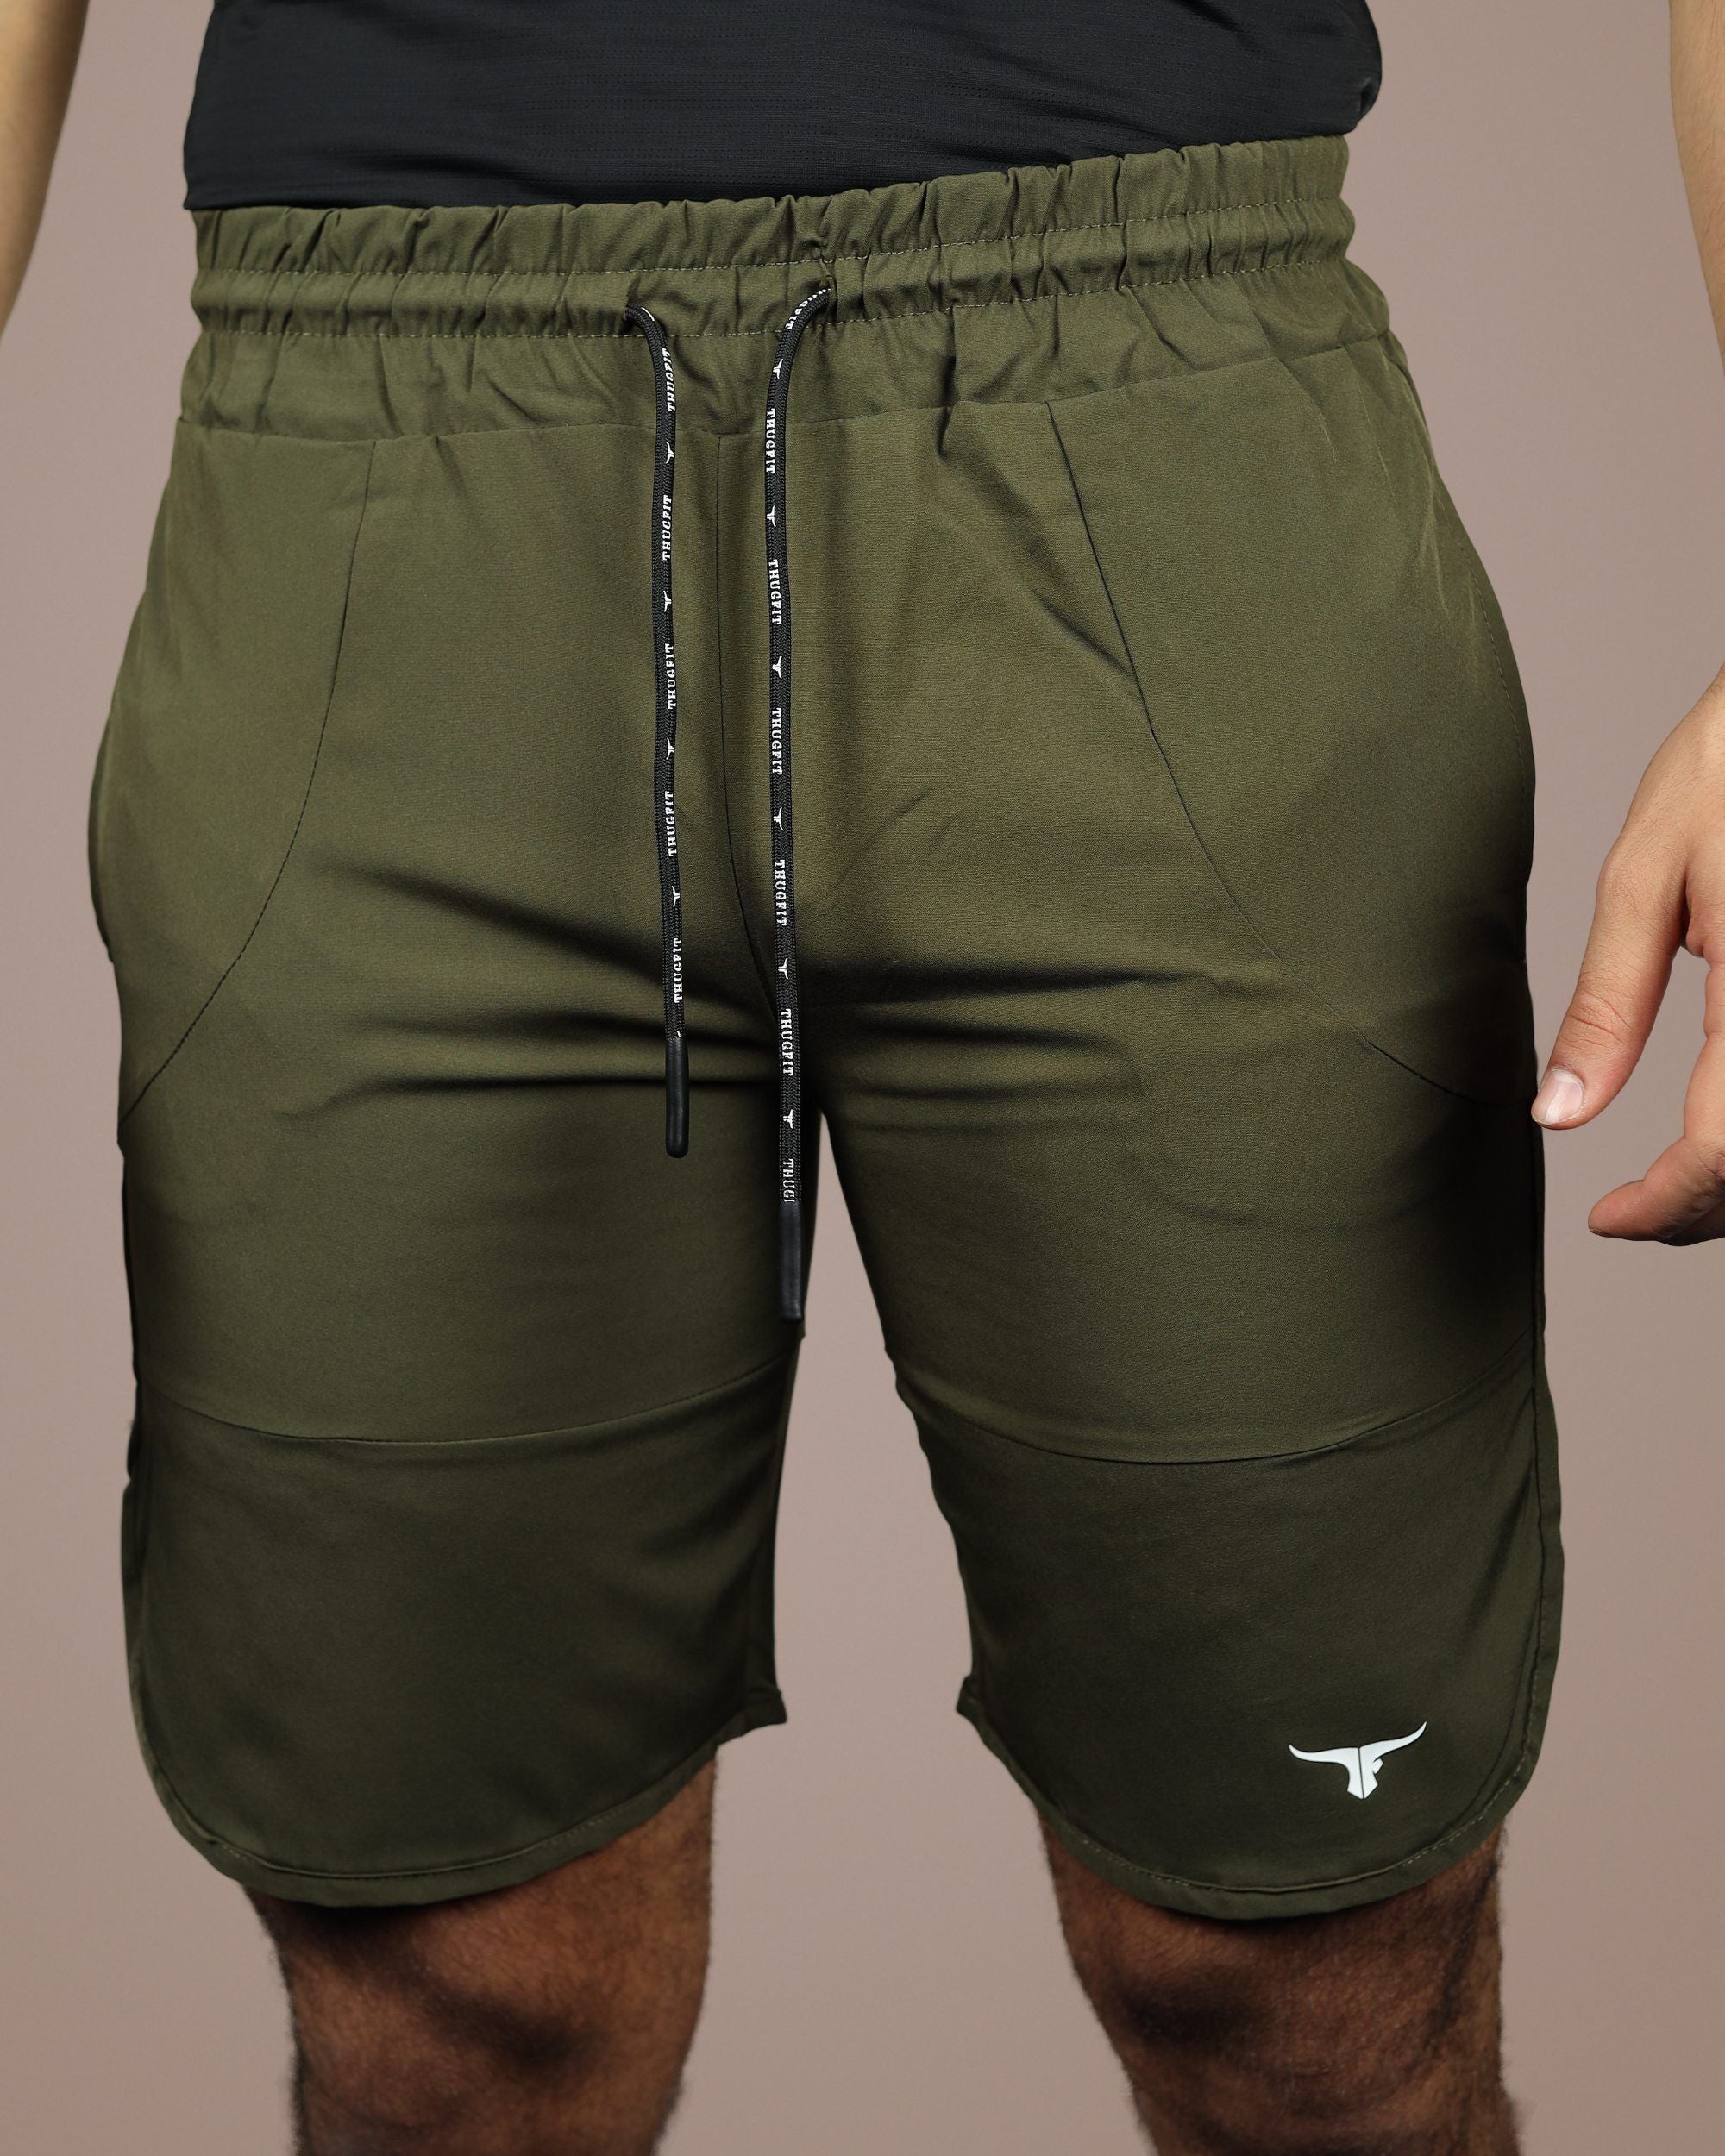 Mens Fengbay Shorts Loose Fit Running And Gym Outfit With Fast Dry  Technology Elastic Sportswear For Adult Fitness LL 8218 From Lyyfzde,  $18.67